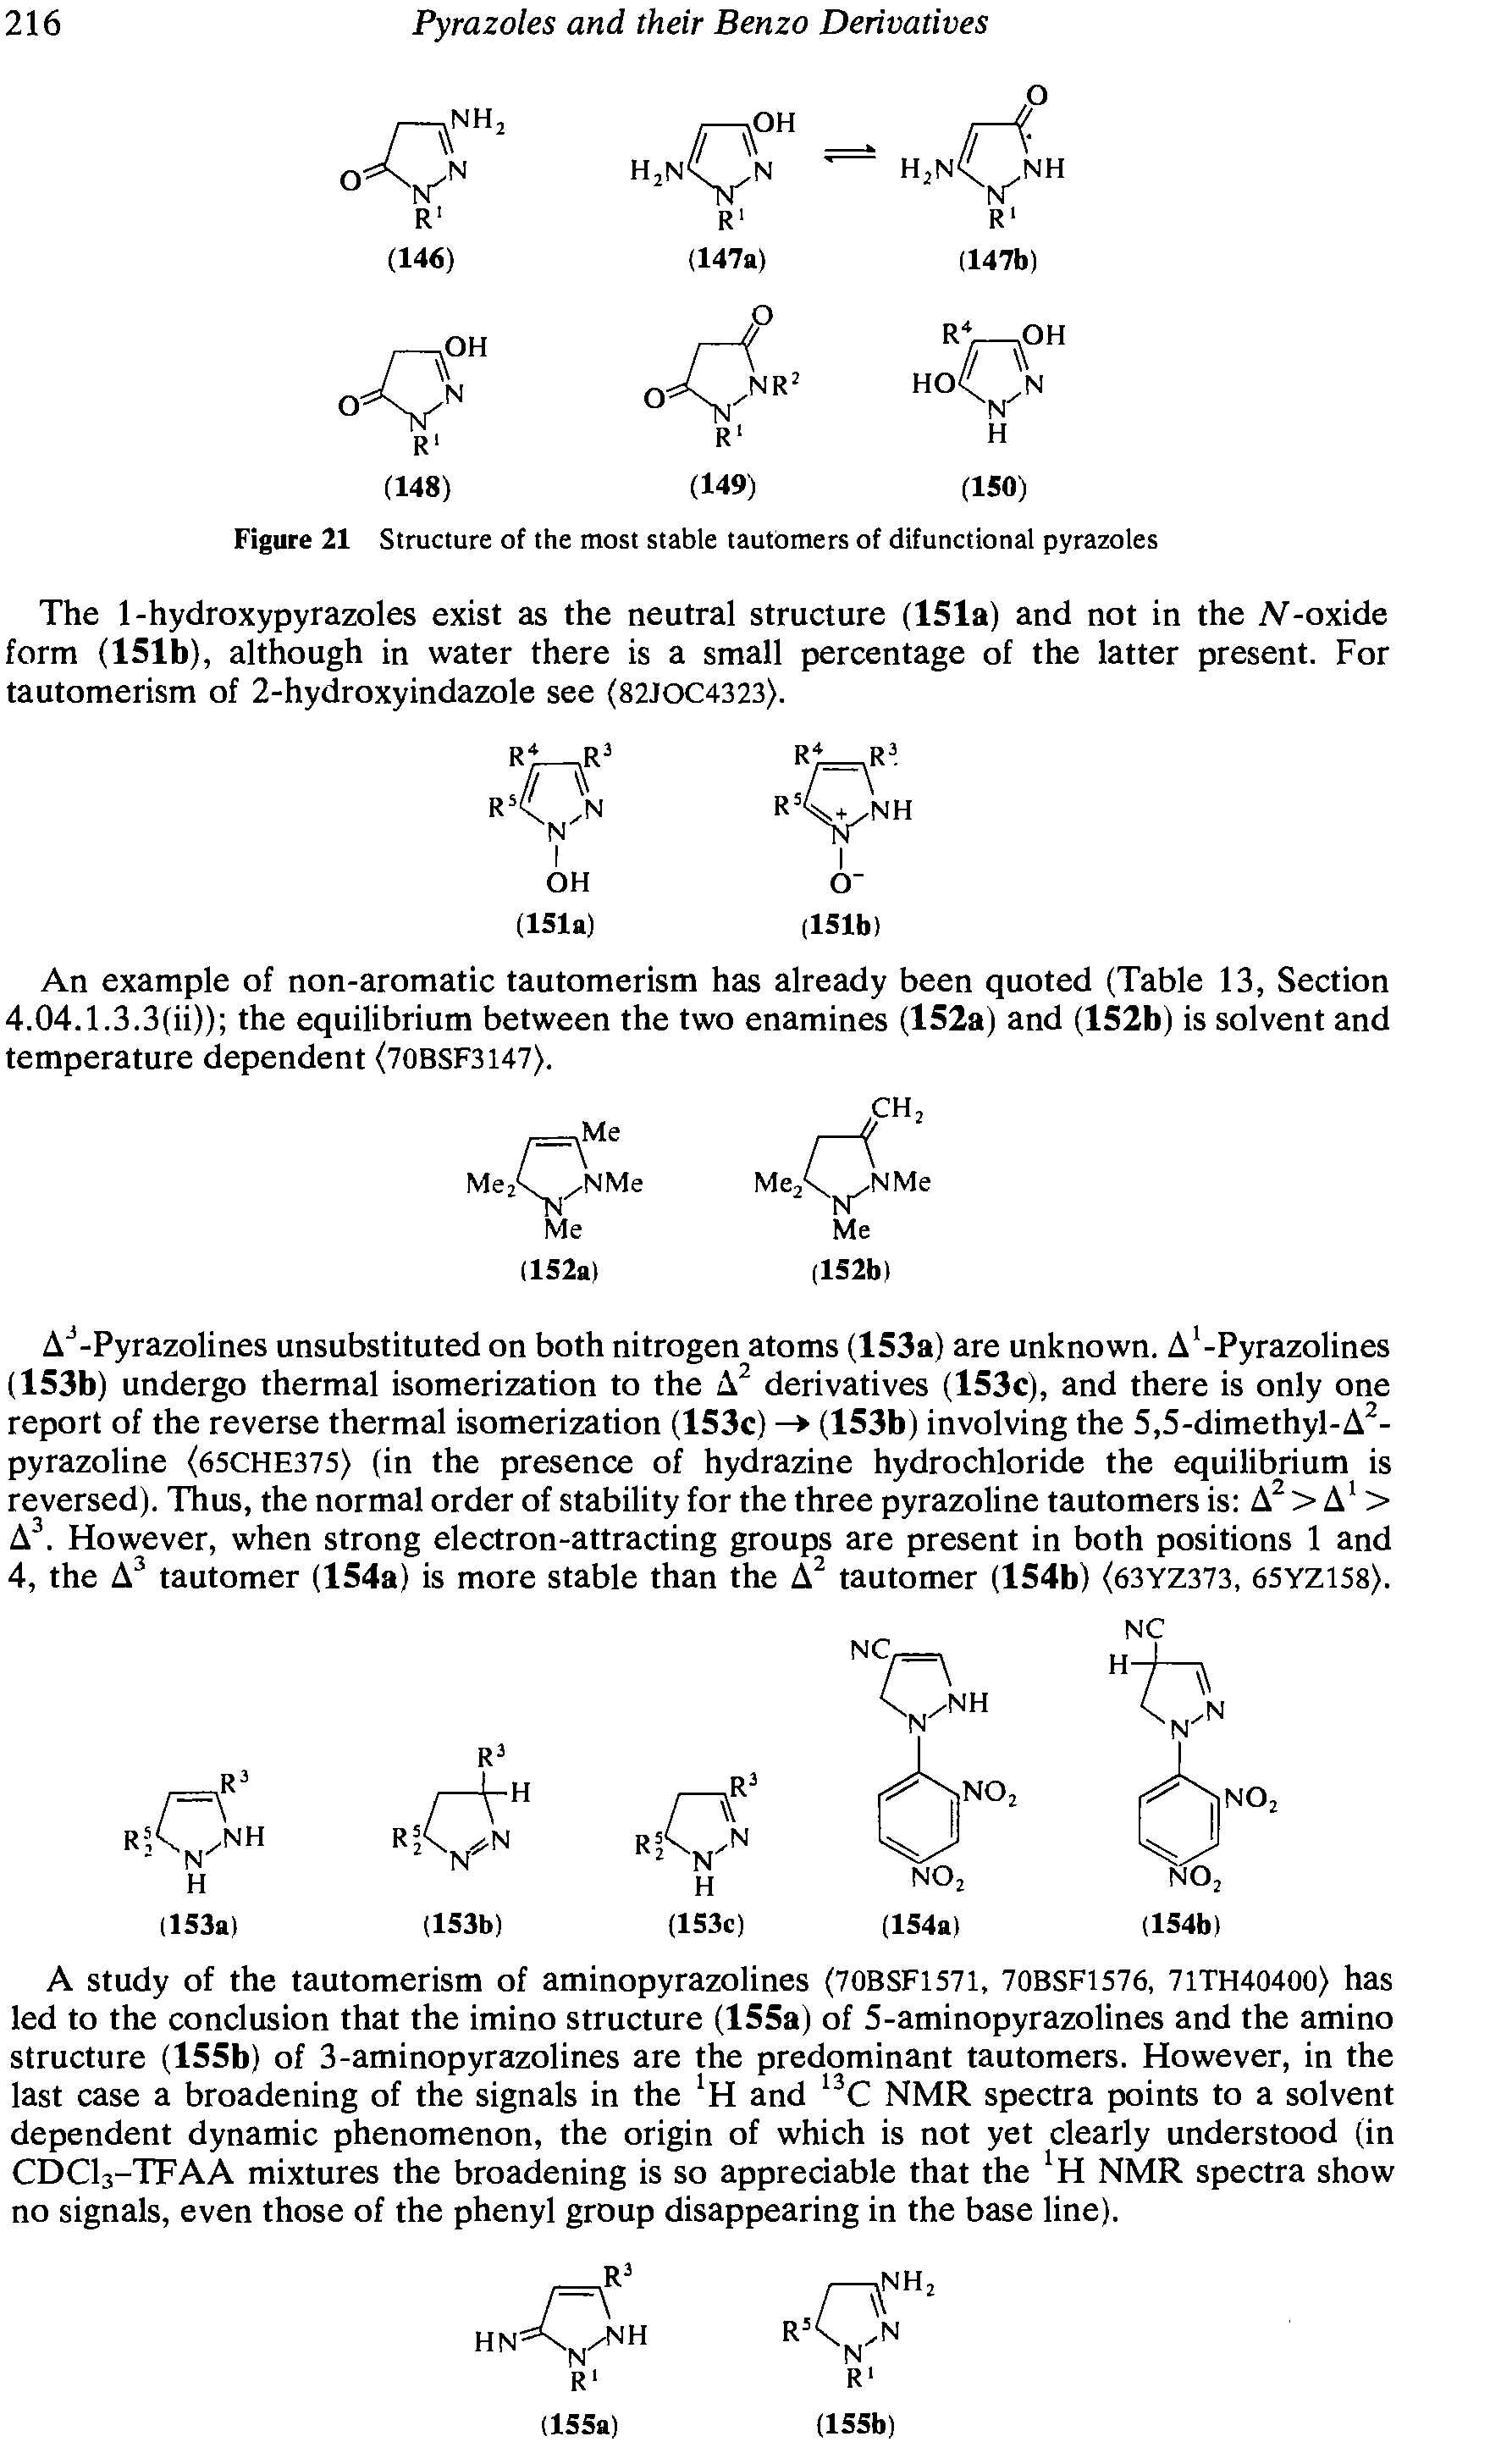 Figure 21 Structure of the most stable tautomers of difunctional pyrazoles...